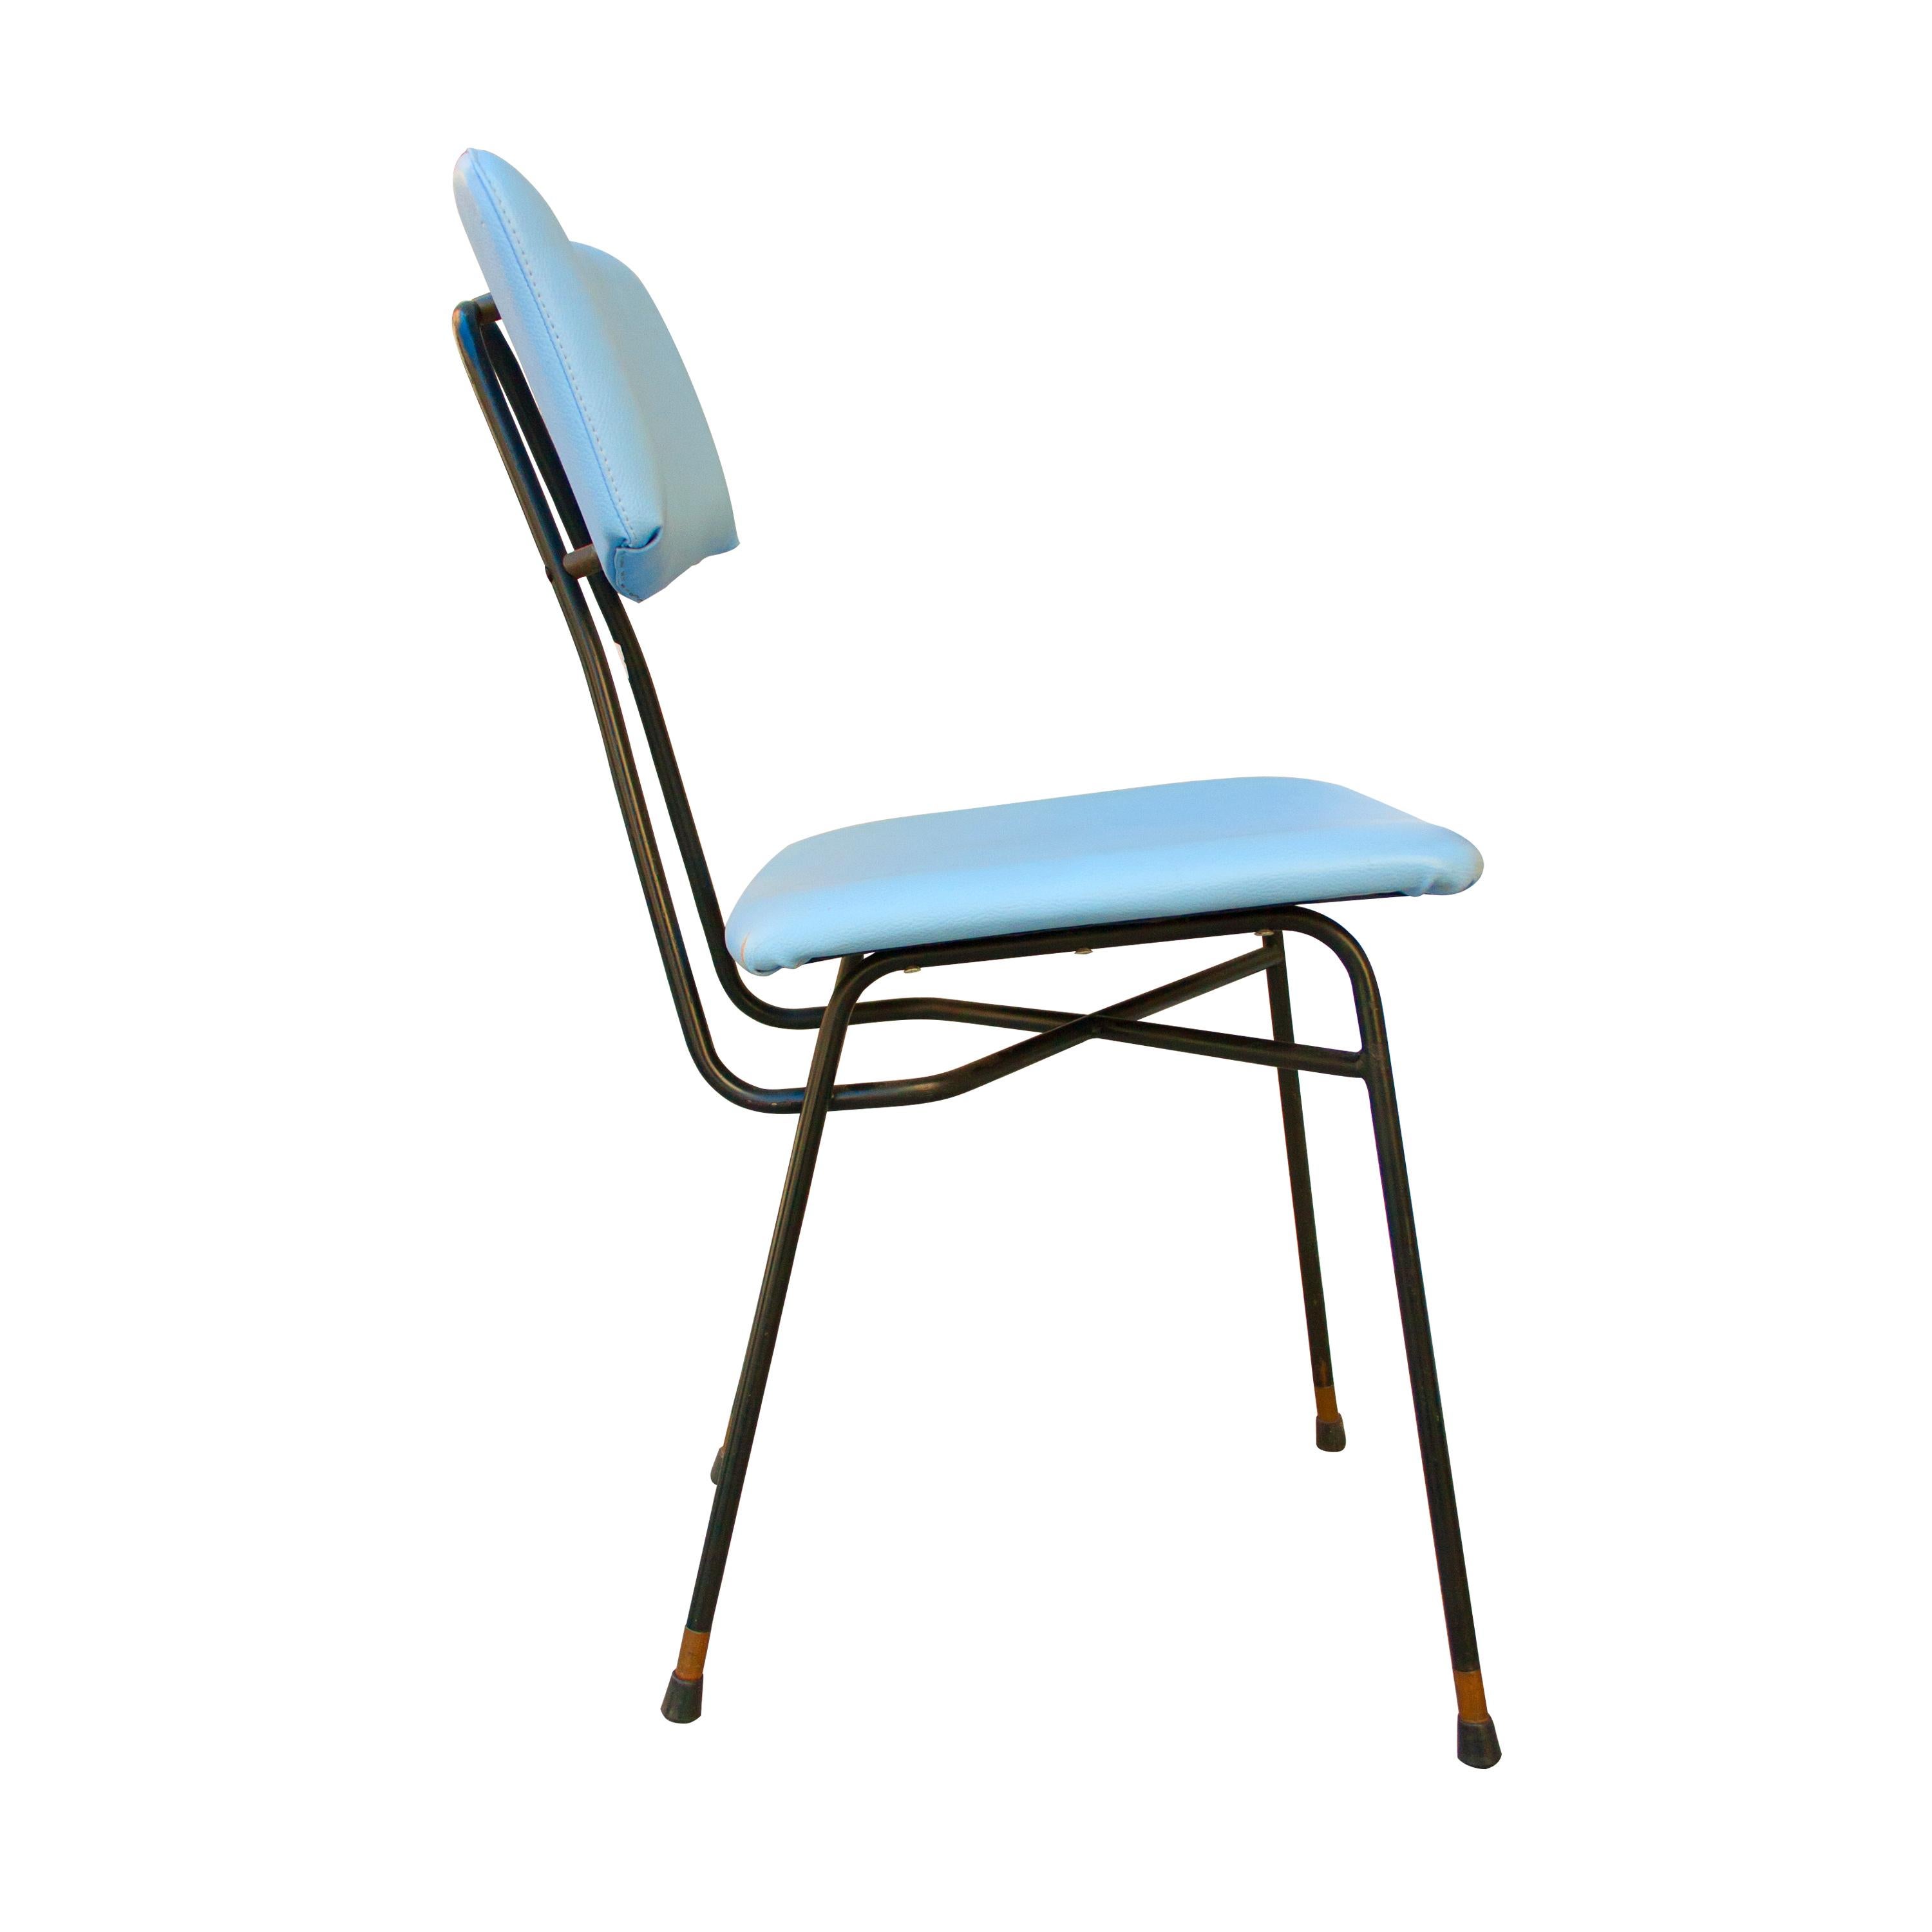 Italian Luigi Scremin 10 Chairs Set Blue Leatherette and Melalic Structure, Italy, 1950 For Sale